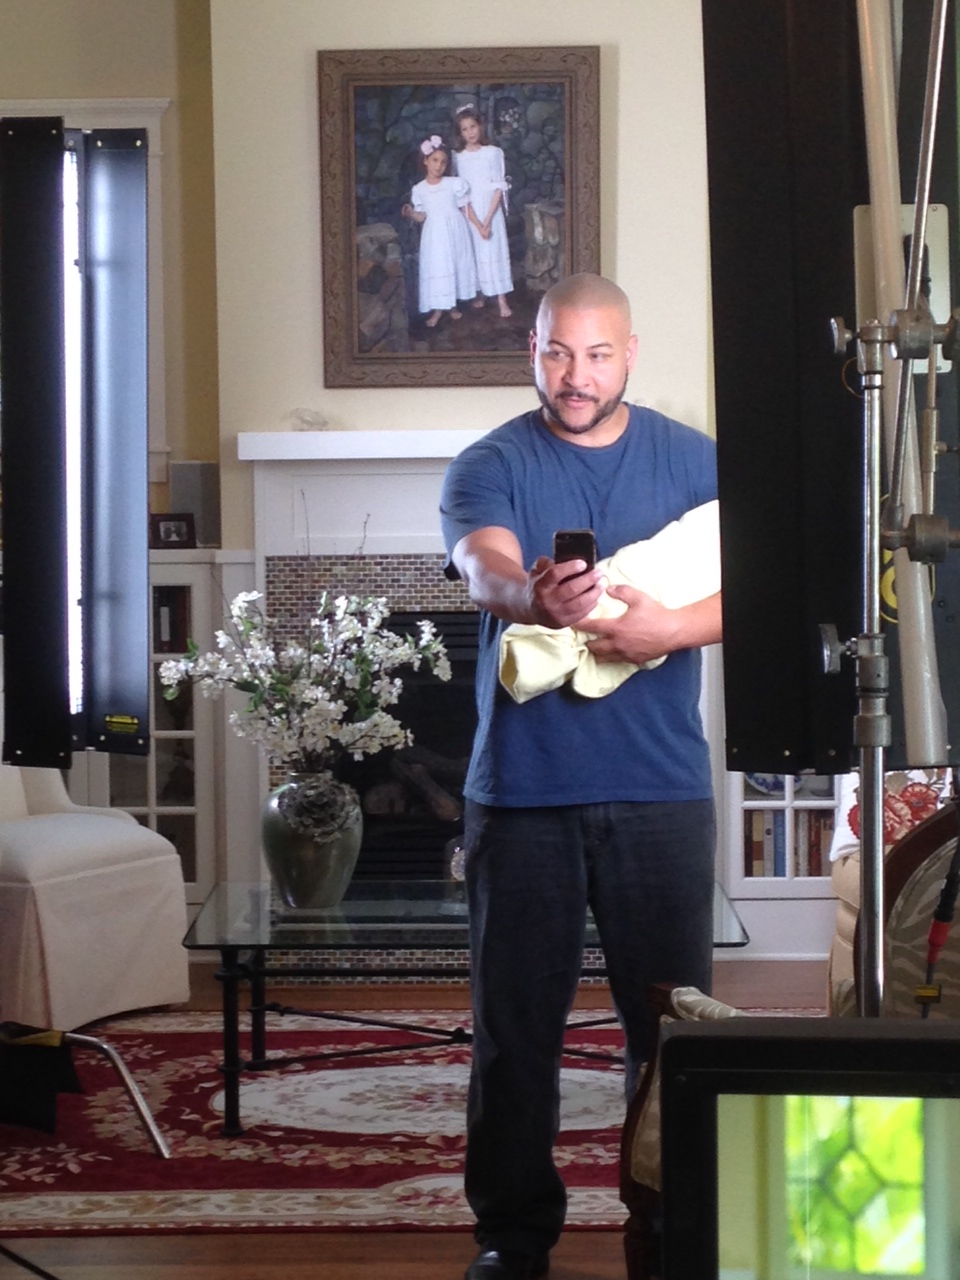 Amscot commercial shoot - I get to show my soft side playing a new father.